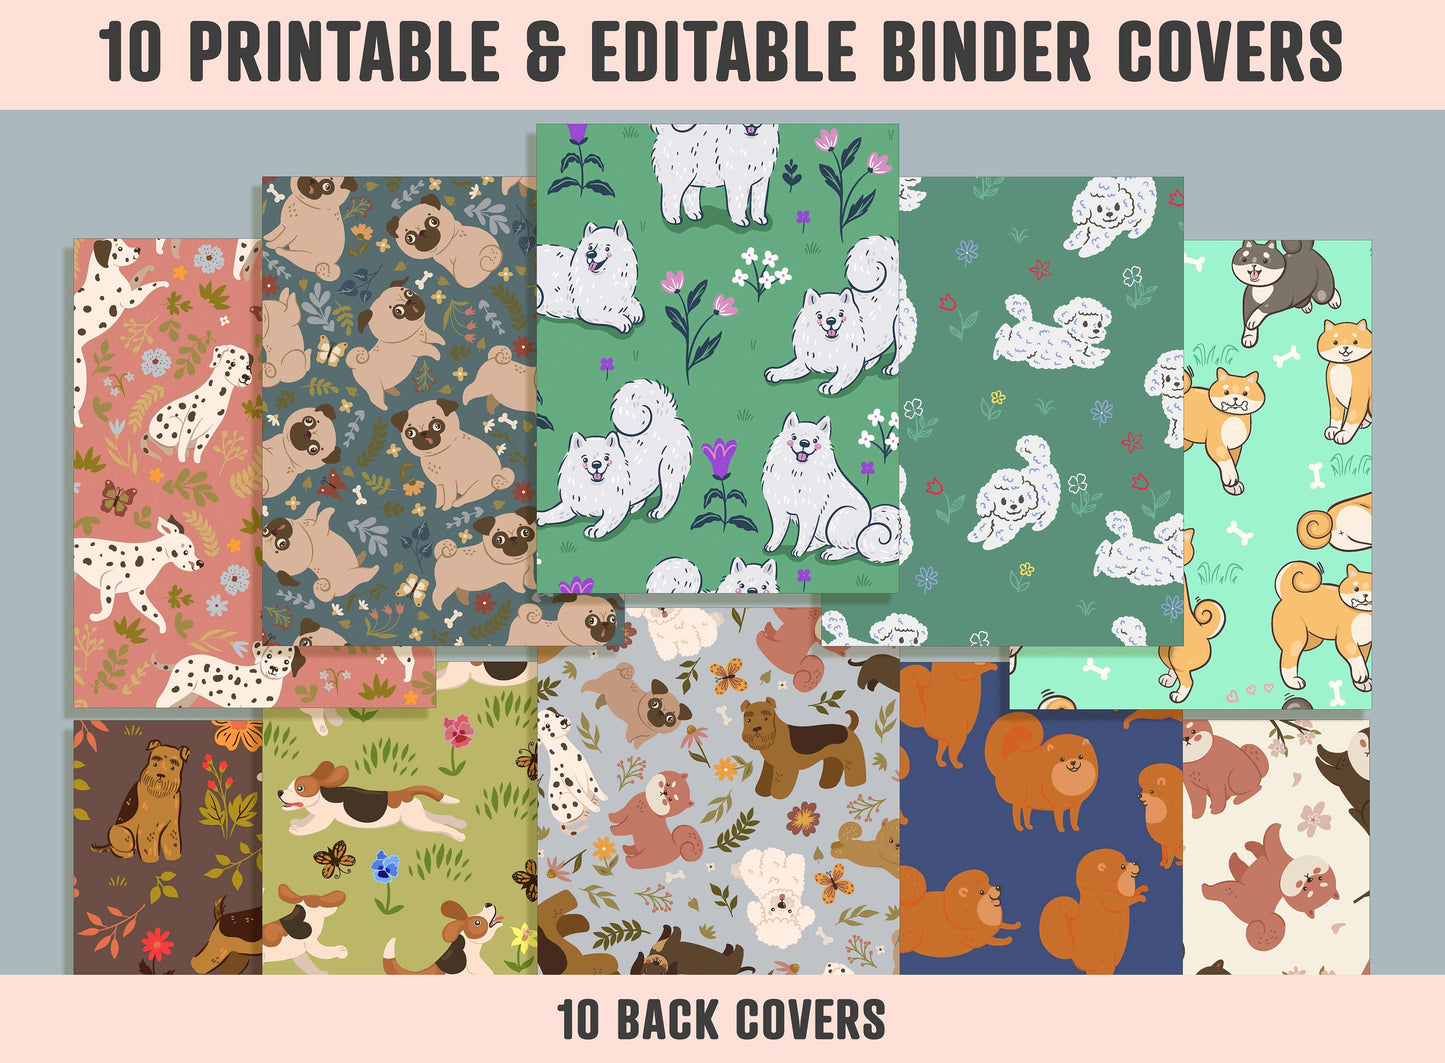 Dogs and Flowers Binder Cover, 10 Printable/Editable Binder Covers + Spines, Puppy Planner Template, Teacher/School Binder Labels/Inserts